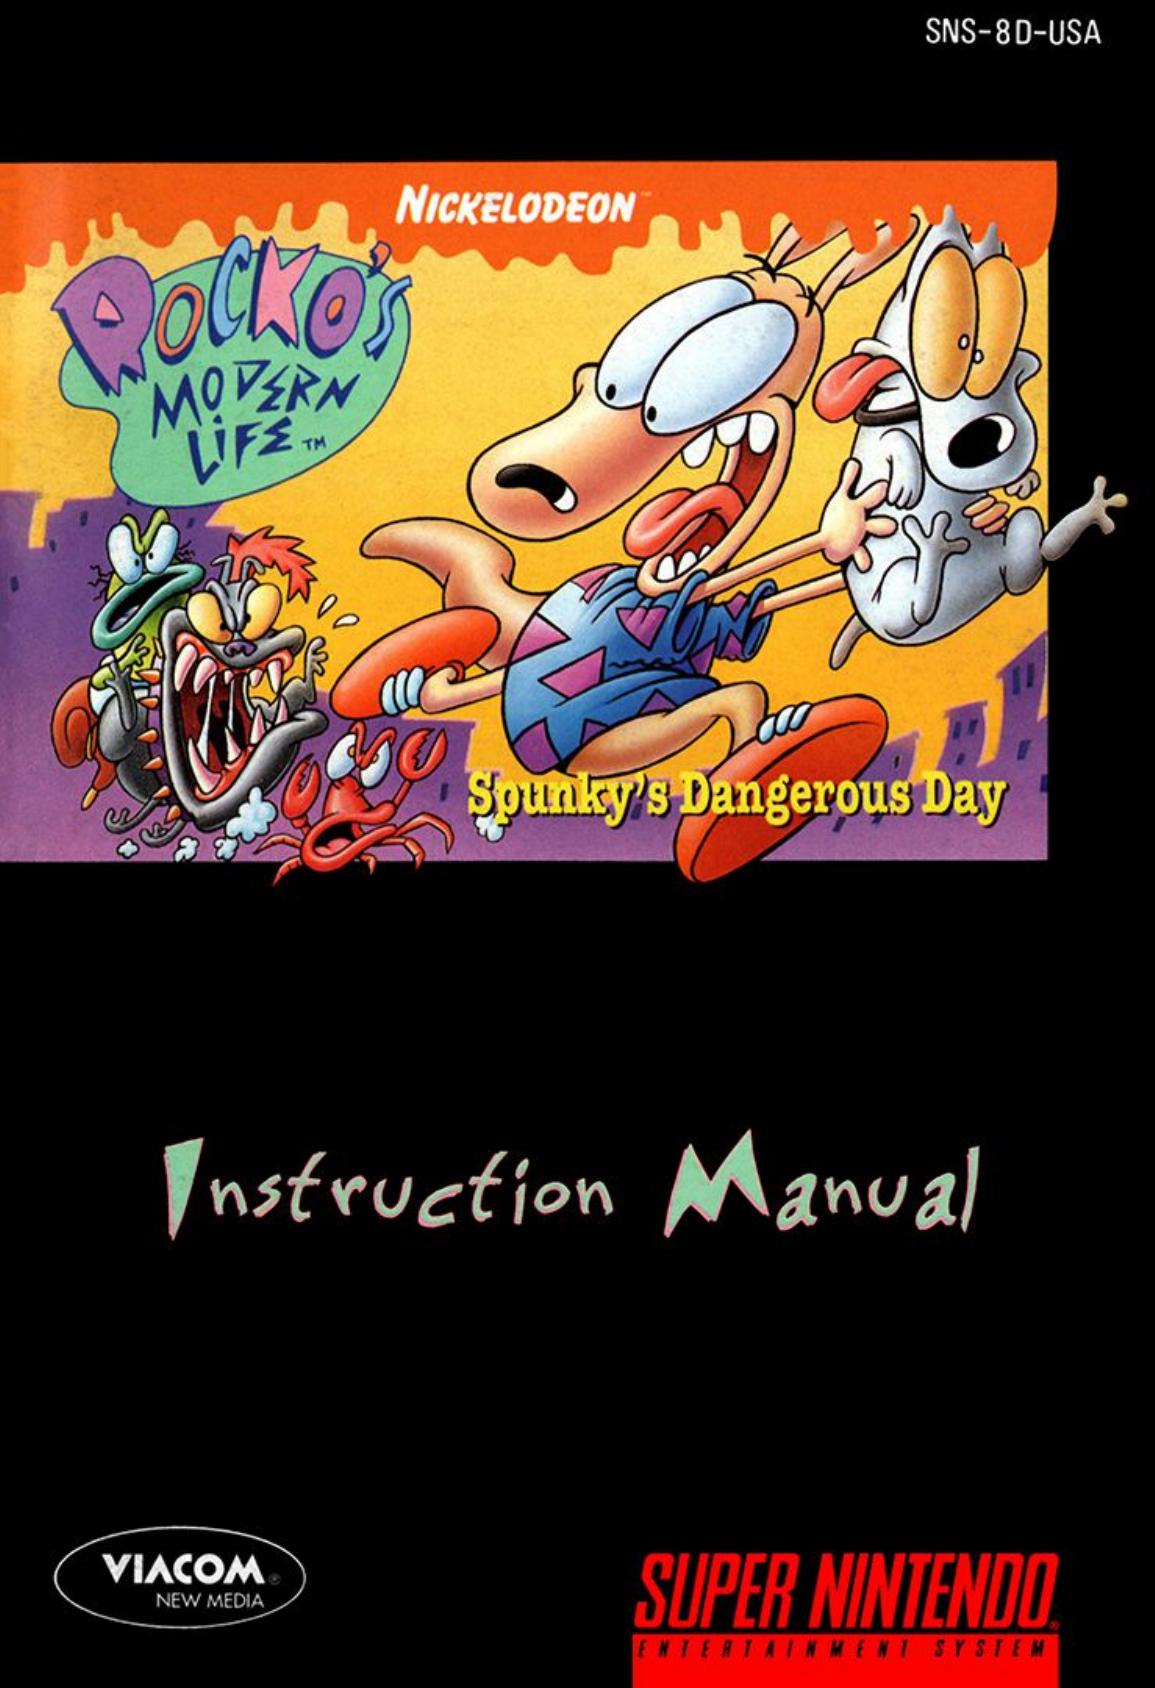 Rocko's Modern Life - Spunky's Dangerous Day (USA) by Jonathan Grimm